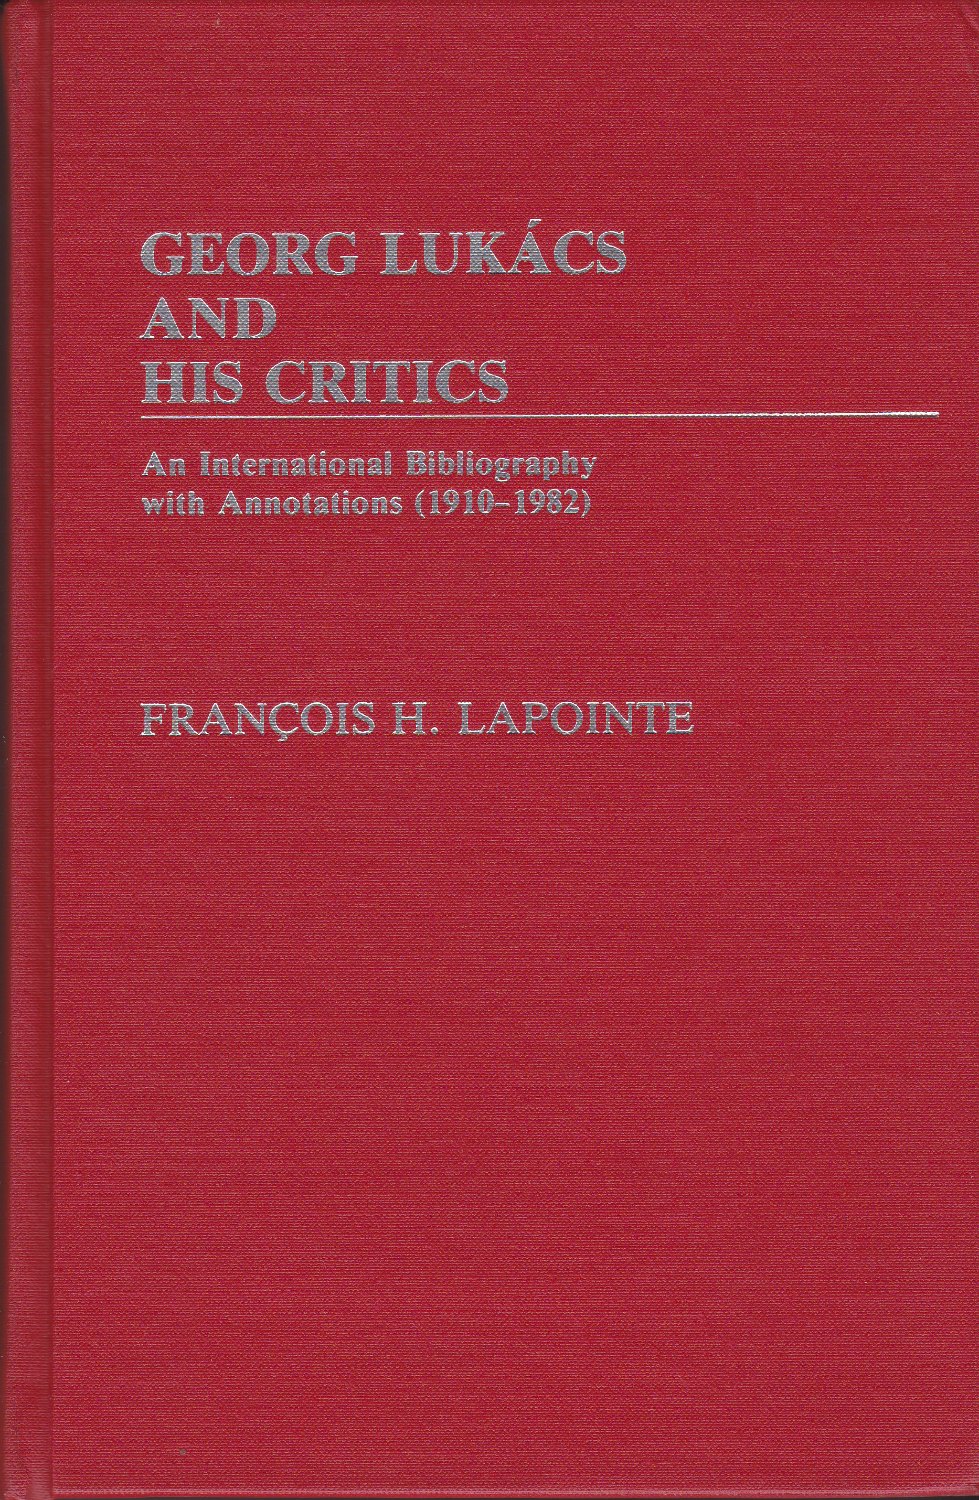 Georg Lukacs and his critics : an international bibliography with annotations (1910-1982).